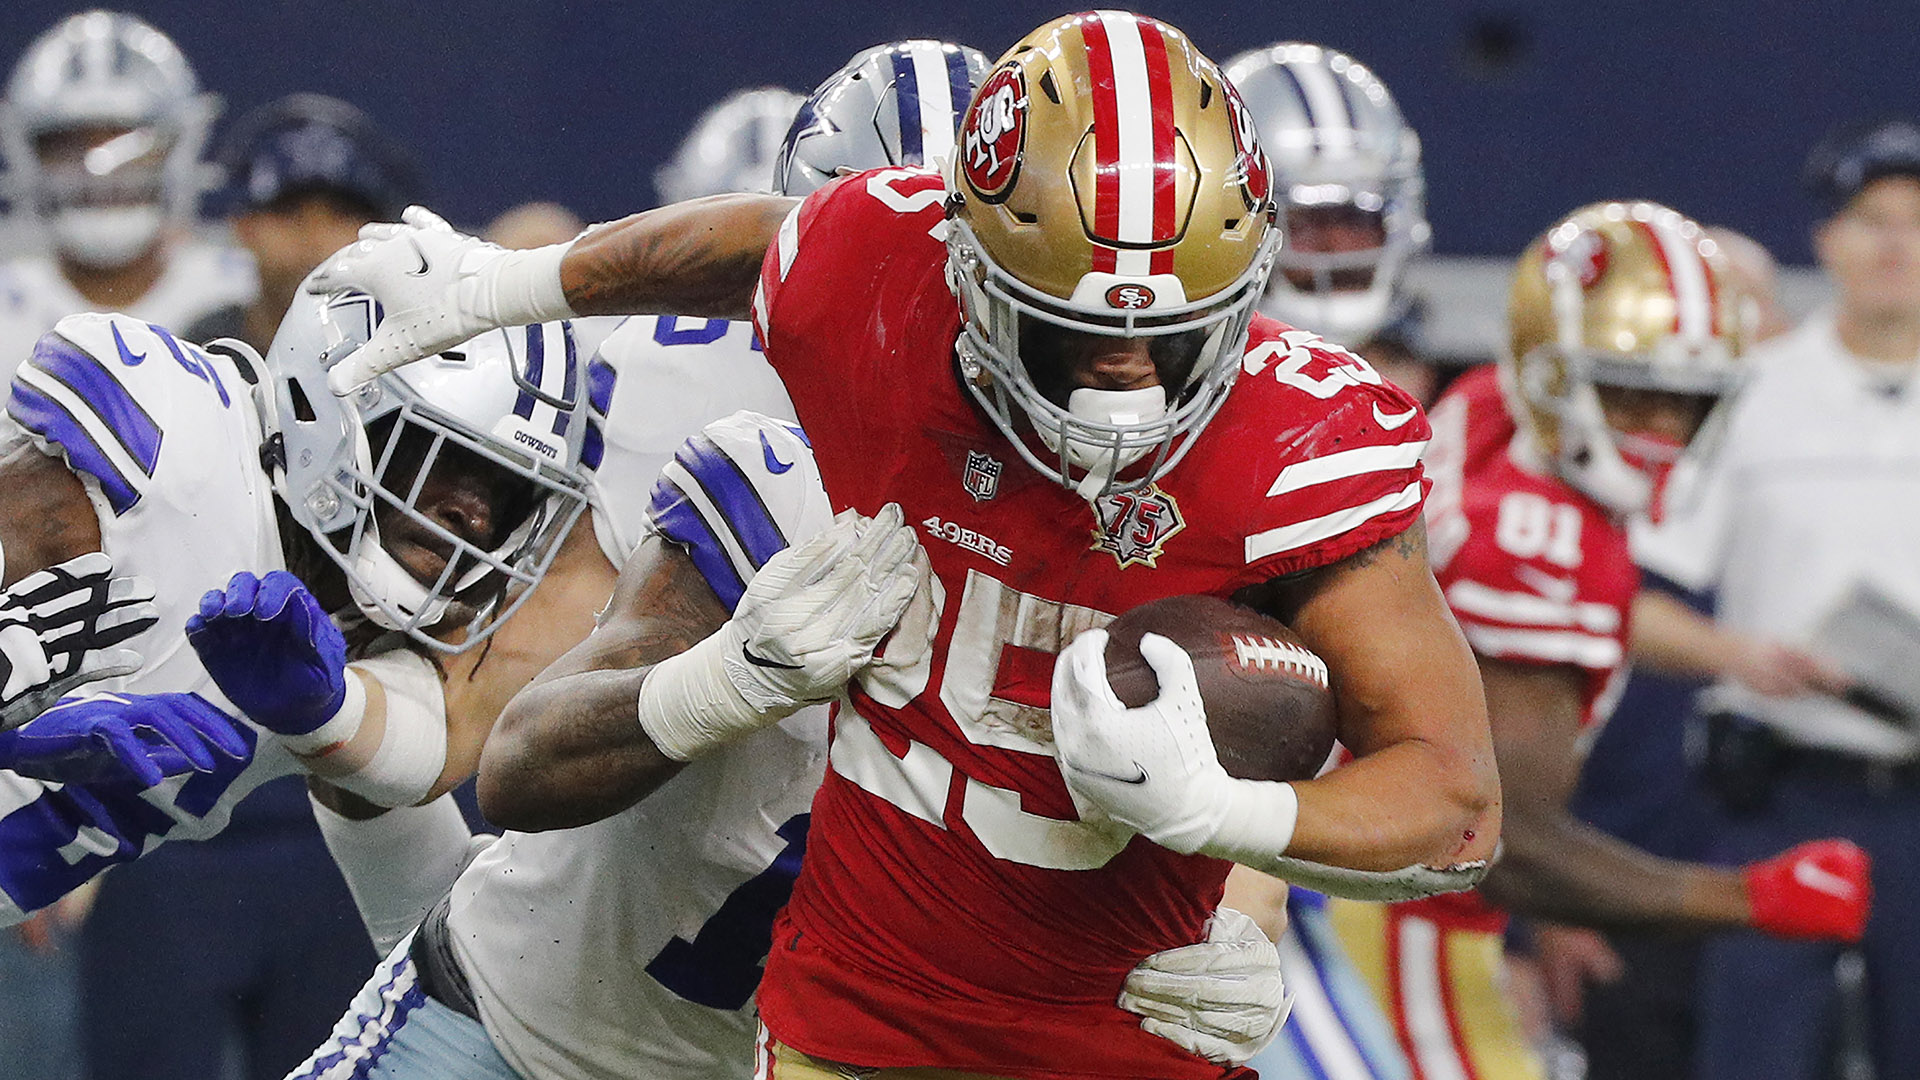 Cowboys Can't Overcome Penalties, Sacks, Lose to 49ers in Wild Card
Round